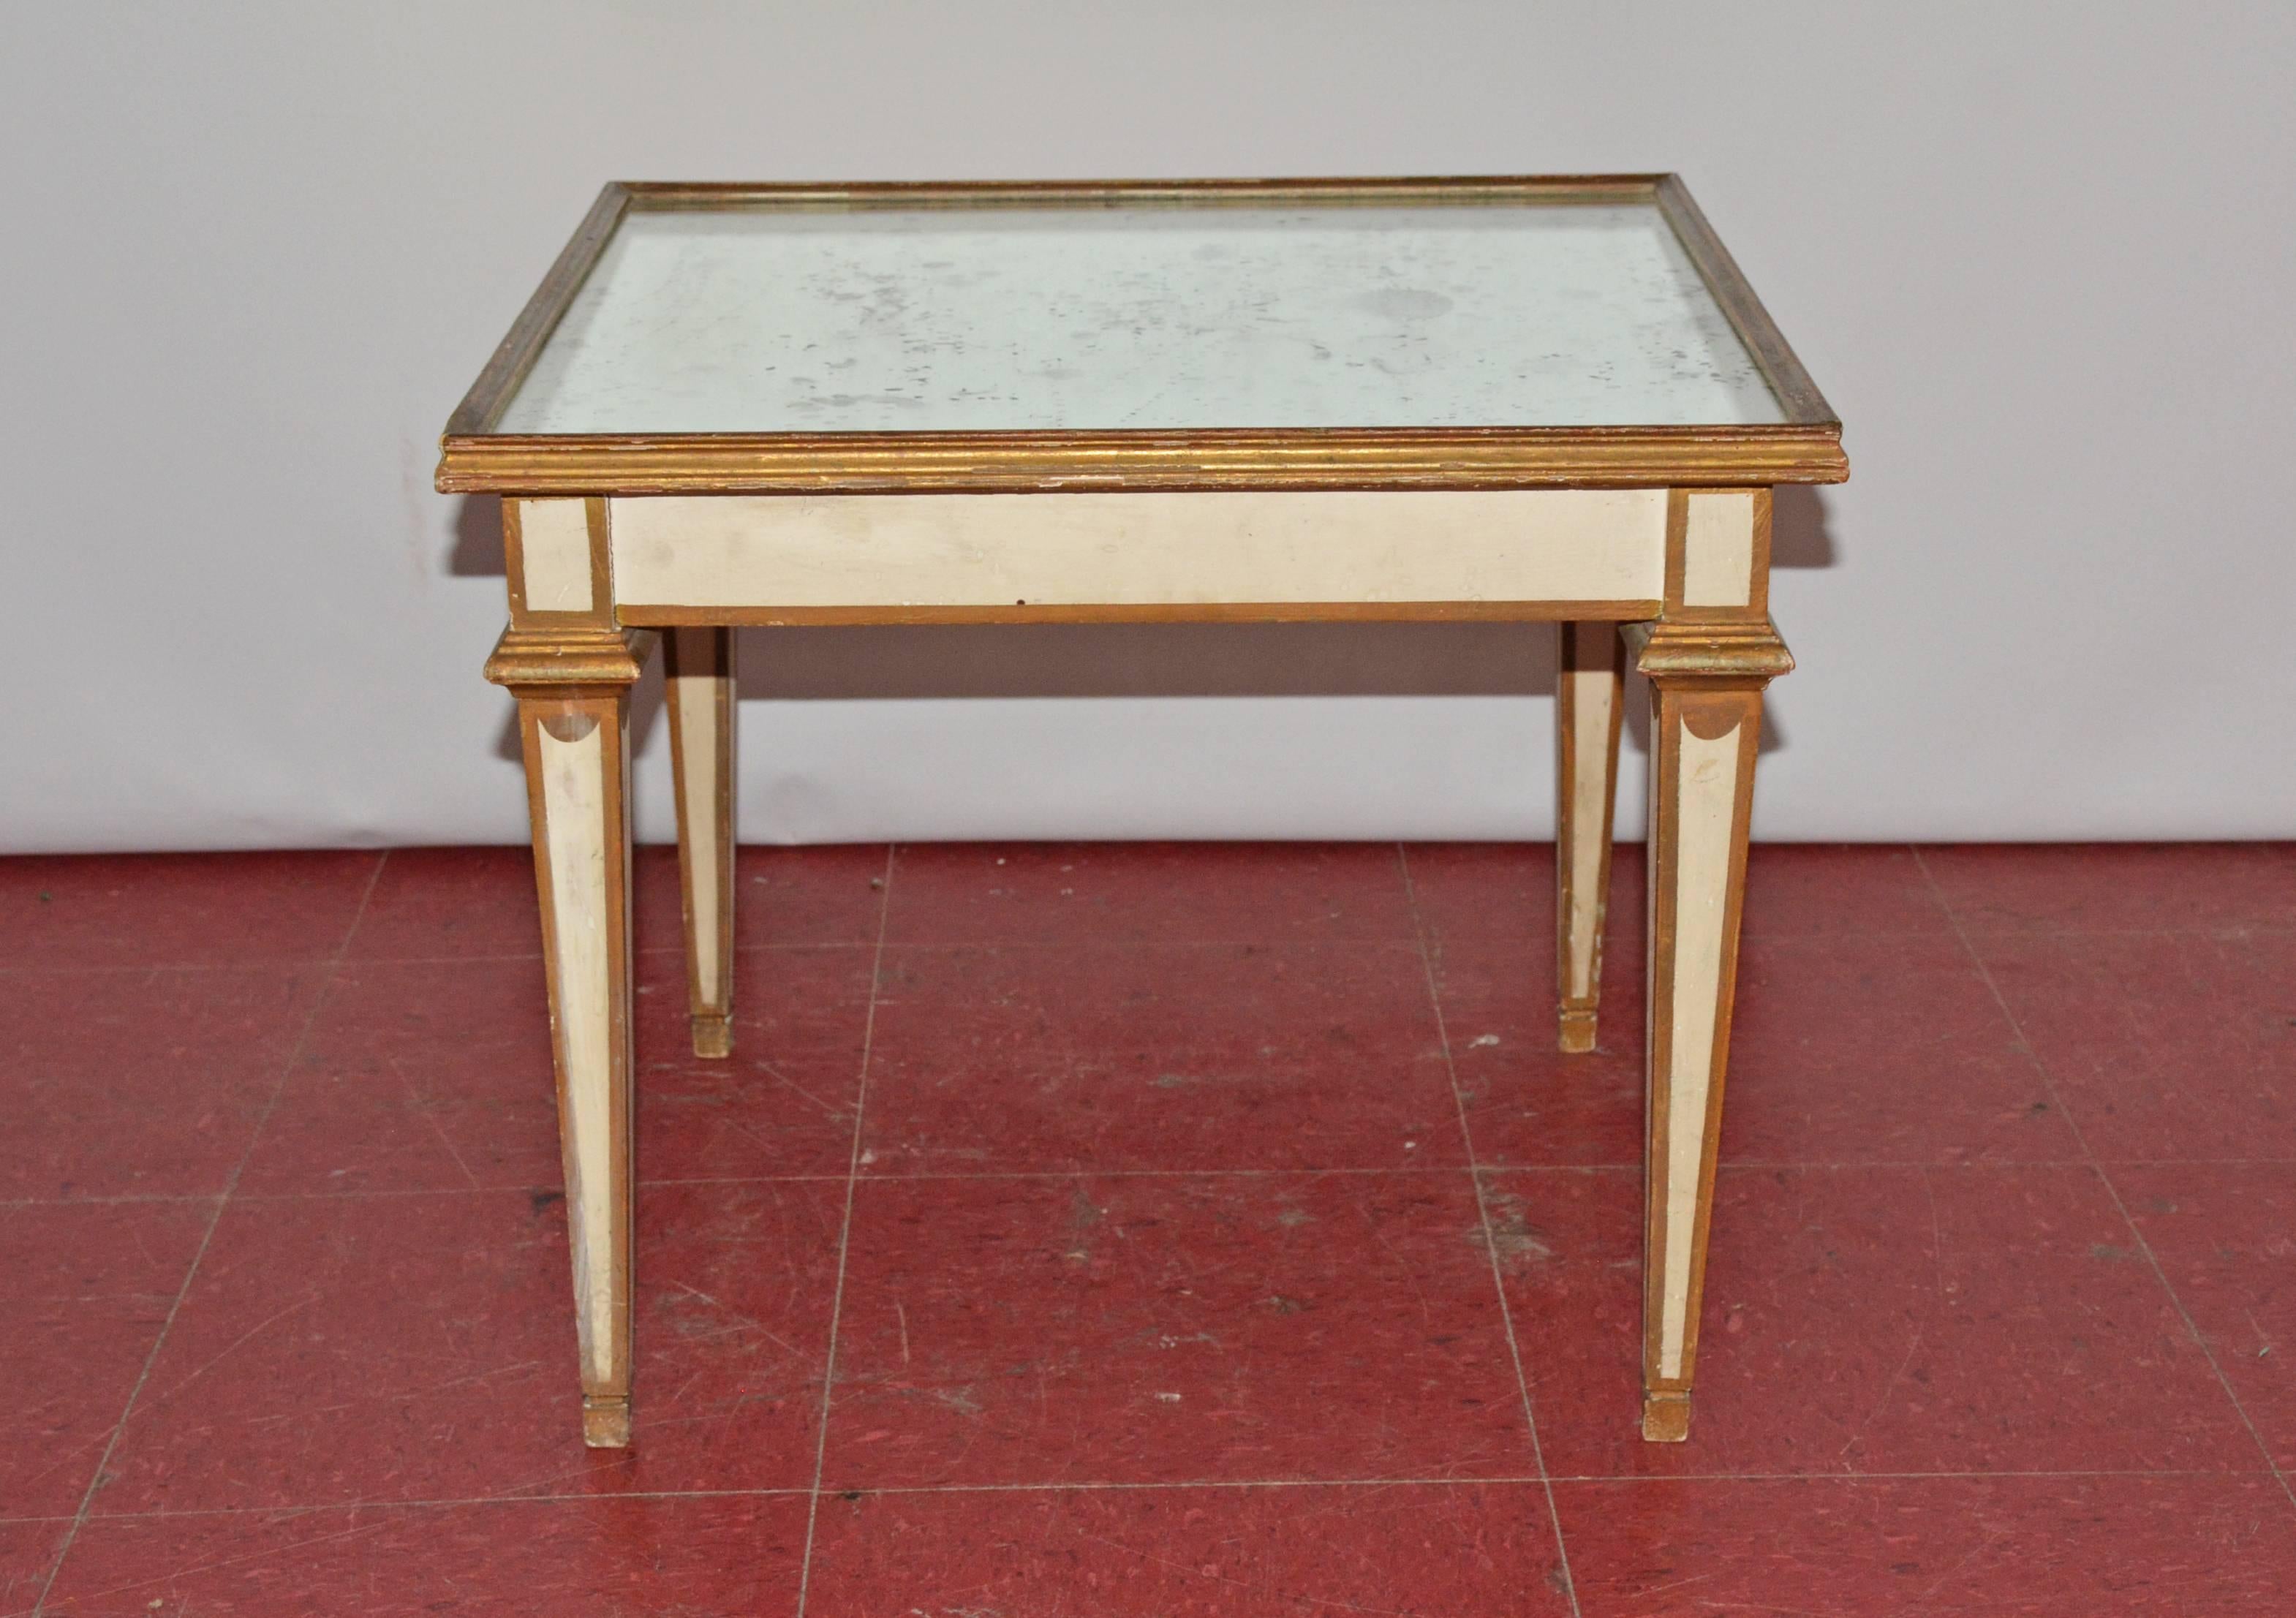 Painted white with gilt trim, the neoclassical coffee or end table features a mirrored top and tapered legs.